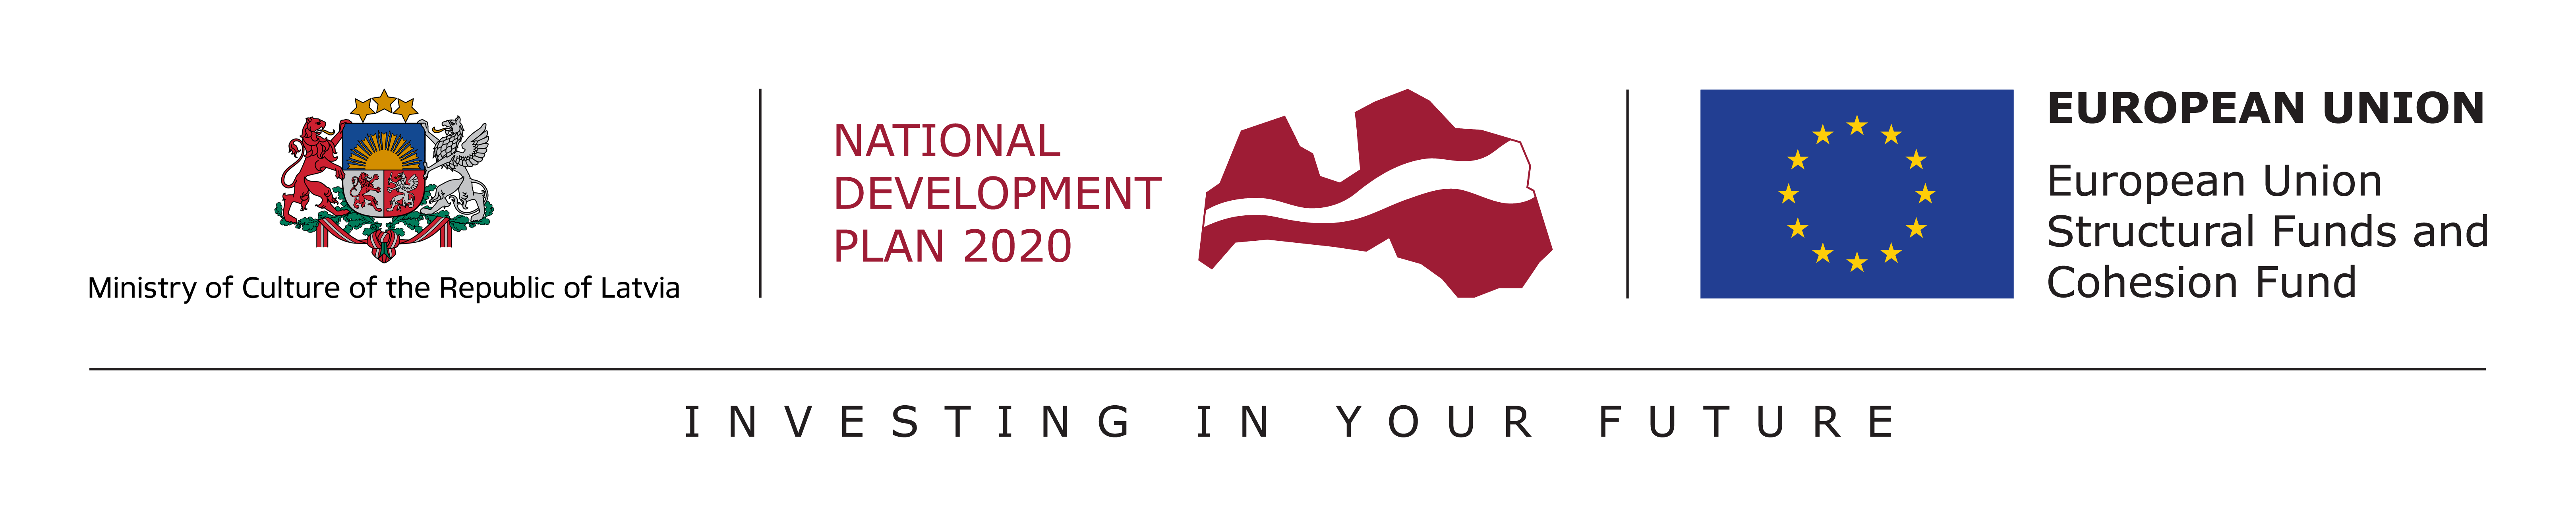 Ministry of Culture of the Republic of Latvia, national Development plan 2020 and European Union Structural Funds and Cohesion Fund logo. Investing in your future.